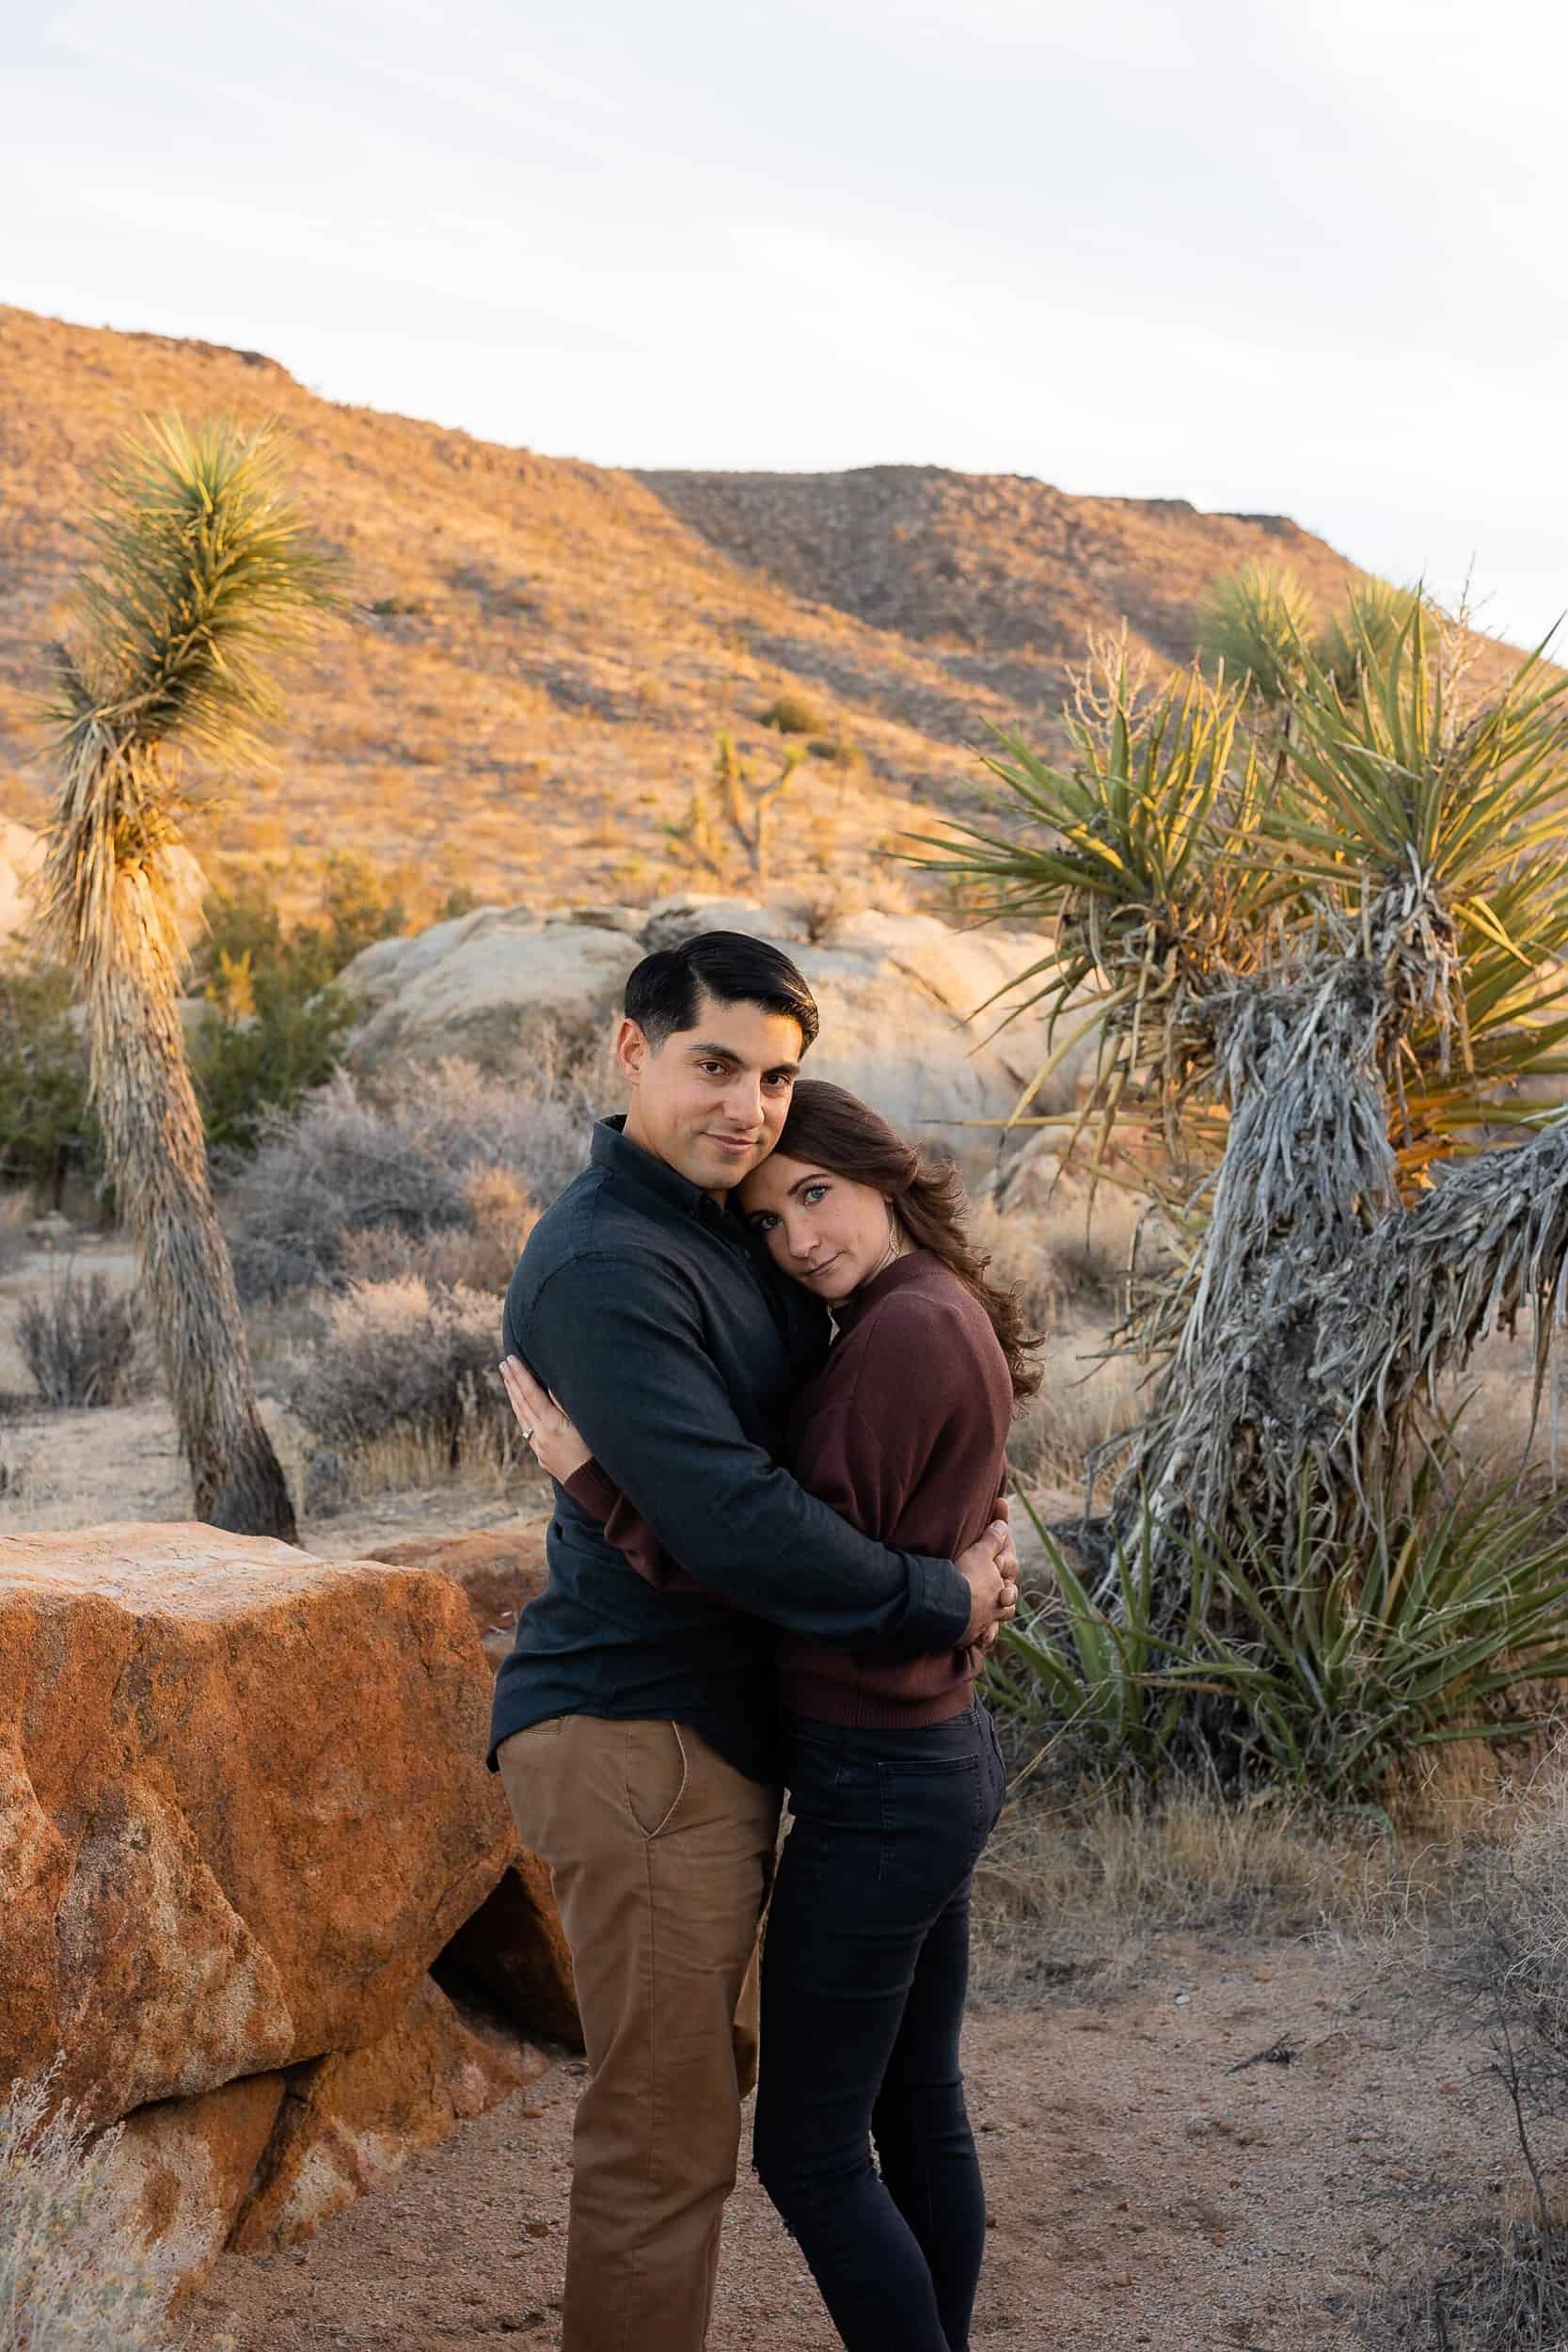 Couple embrace surrounded by cactus in Joshua Tree National Park during their adventure engagement photoshoot